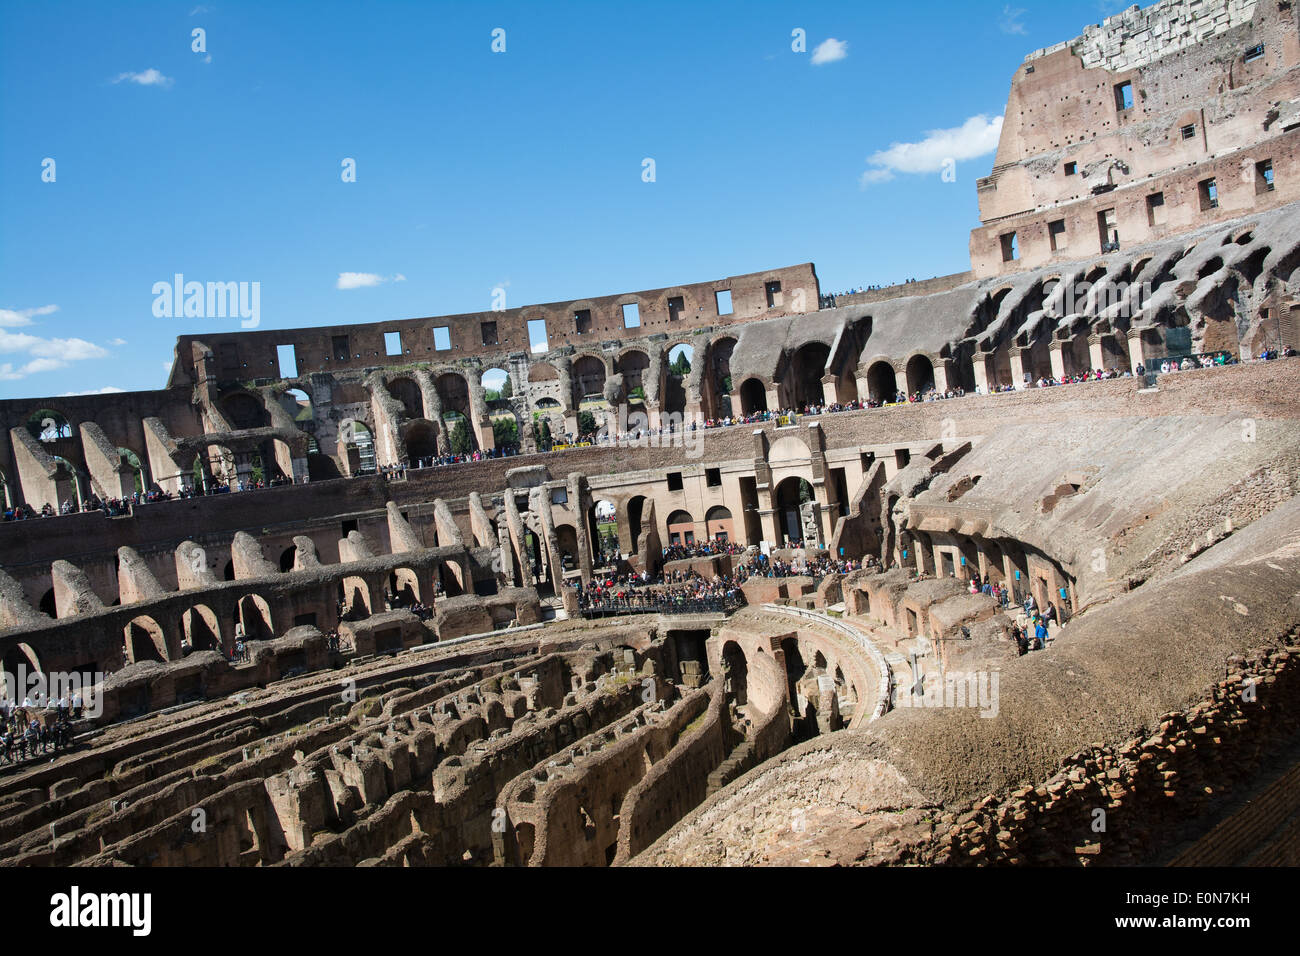 Rome,italy-April 17,2014:people admire the interior of the ancient roman coliseum in the sunny day in the center of Rome Stock Photo